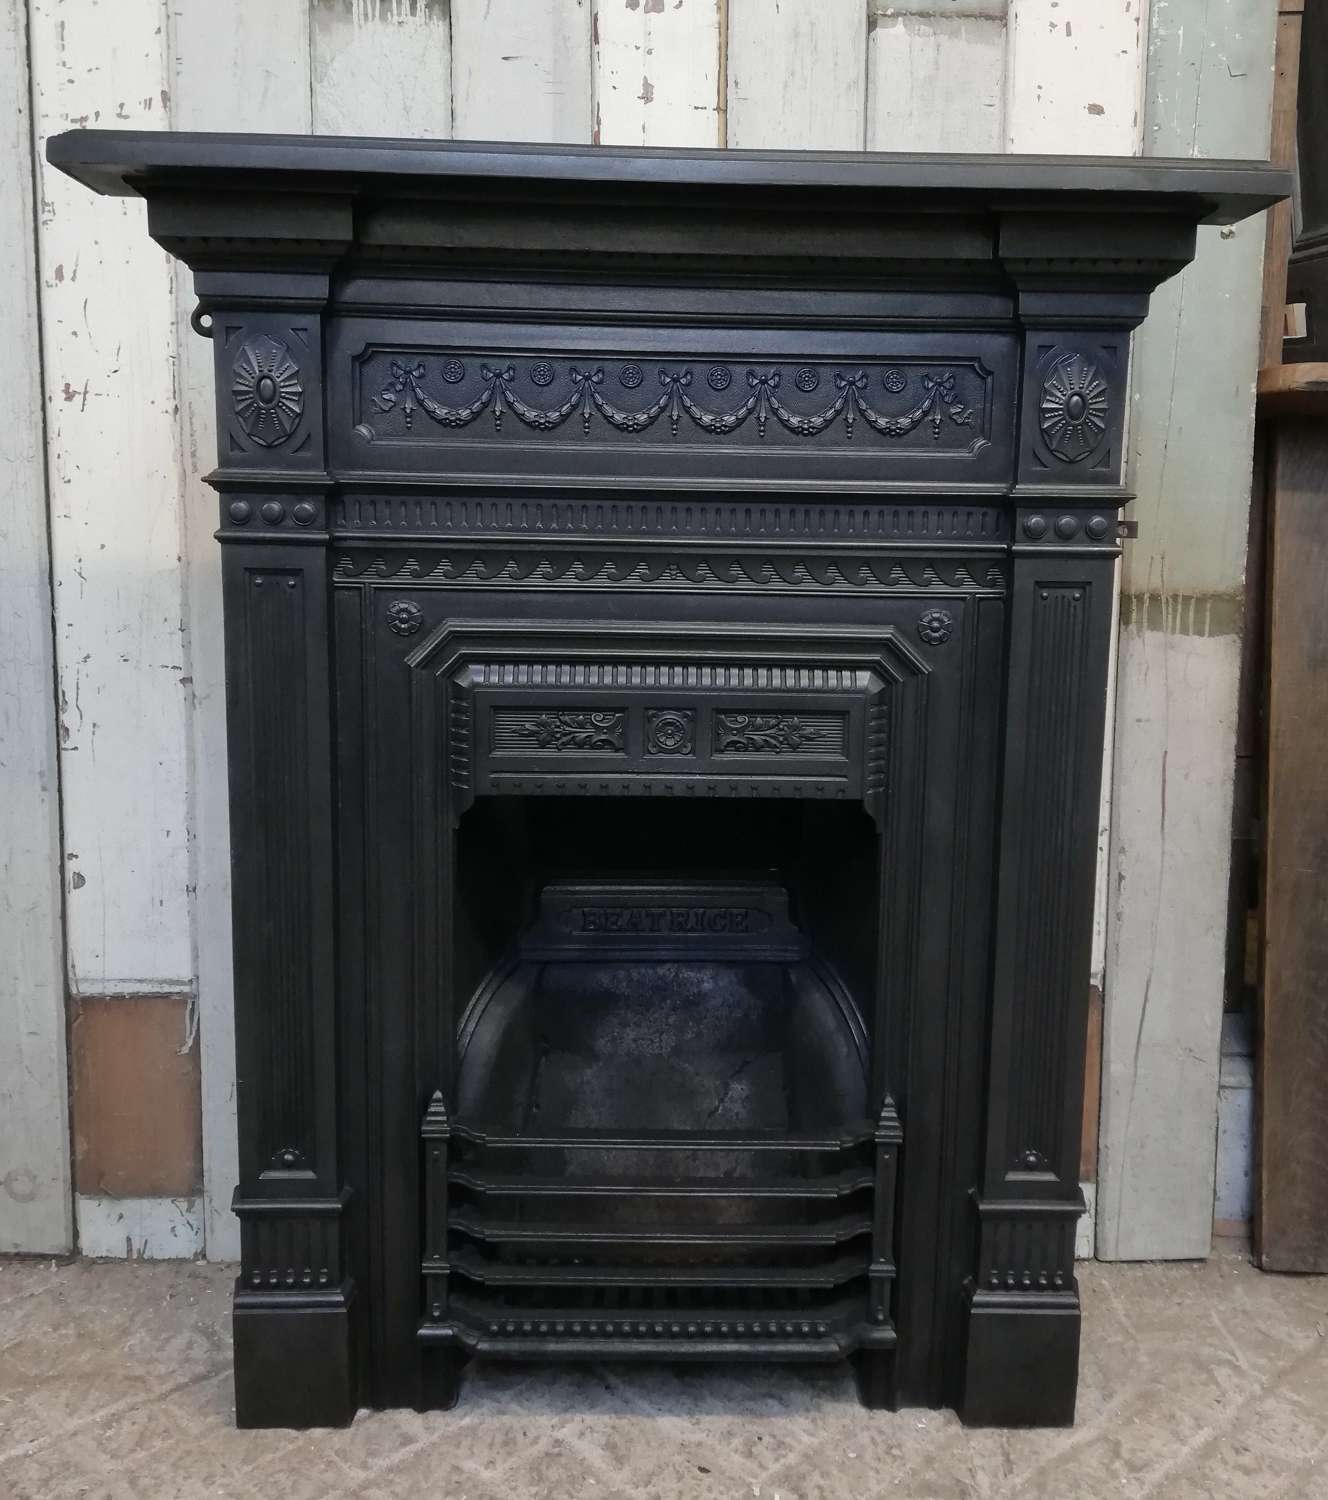 FC0071 A VERY ATTRACTIVE LATE VICTORIAN CAST IRON COMBINATION FIRE